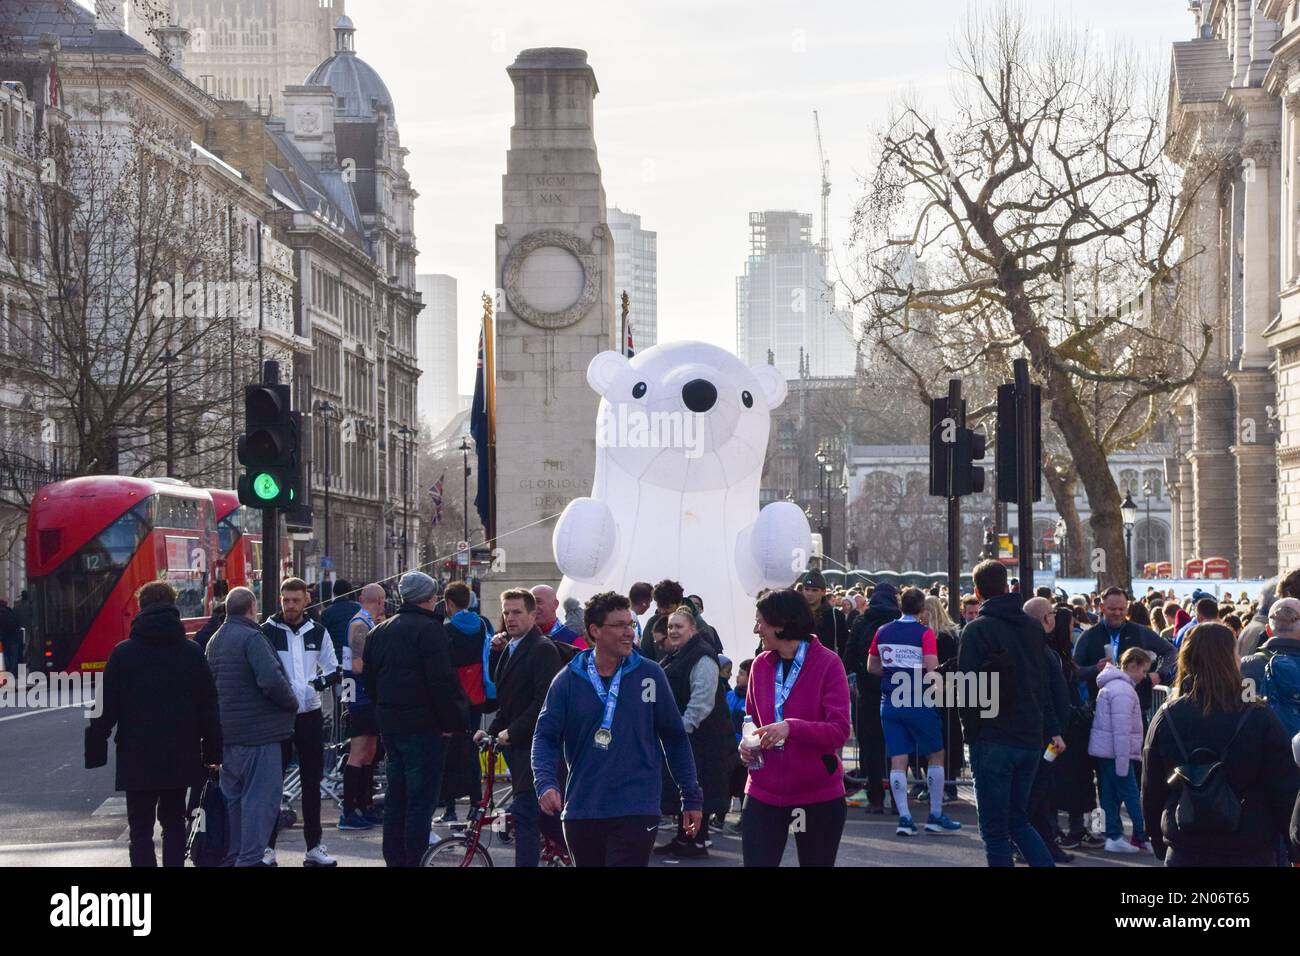 London, UK. 5th February 2023. An inflatable polar bear greets participants at the finish line in Whitehall during this year's Cancer Research UK Winter Run in central London. Thousands of runners take part in the annual event raising funds for cancer research. Credit: Vuk Valcic/Alamy Live News Stock Photo